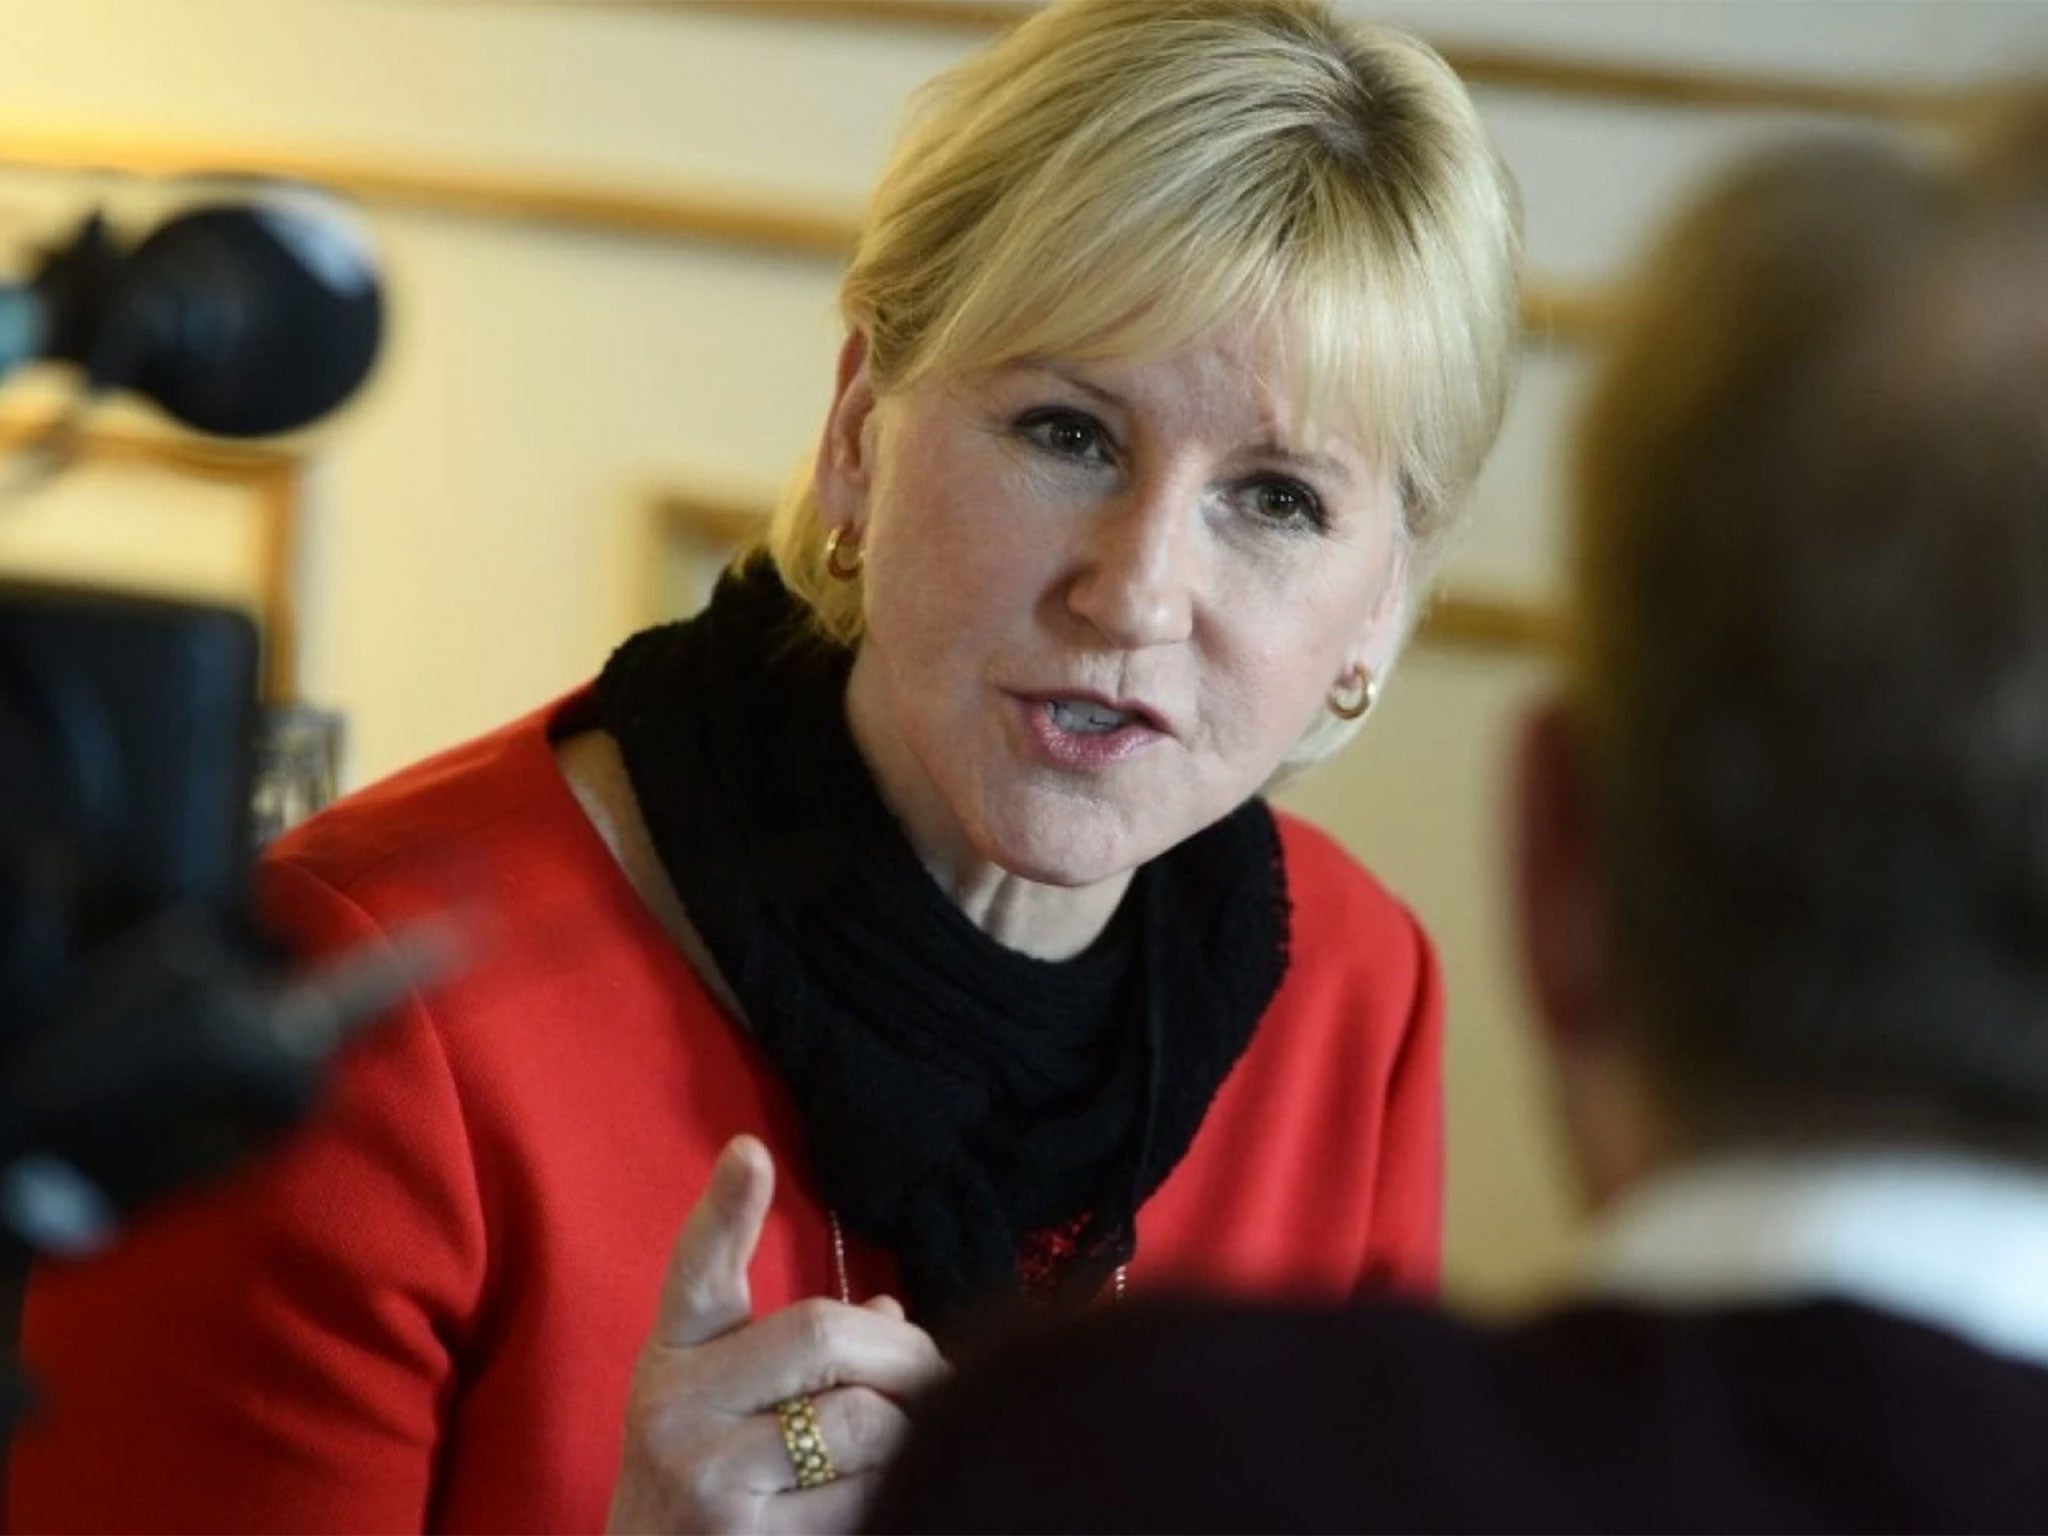 Swedish Foreign Minister Margot Wallstrom gestures during an interview with Sweden's TT News Agency at the Ministry of Foreign Affairs in central Stockholm on March 11